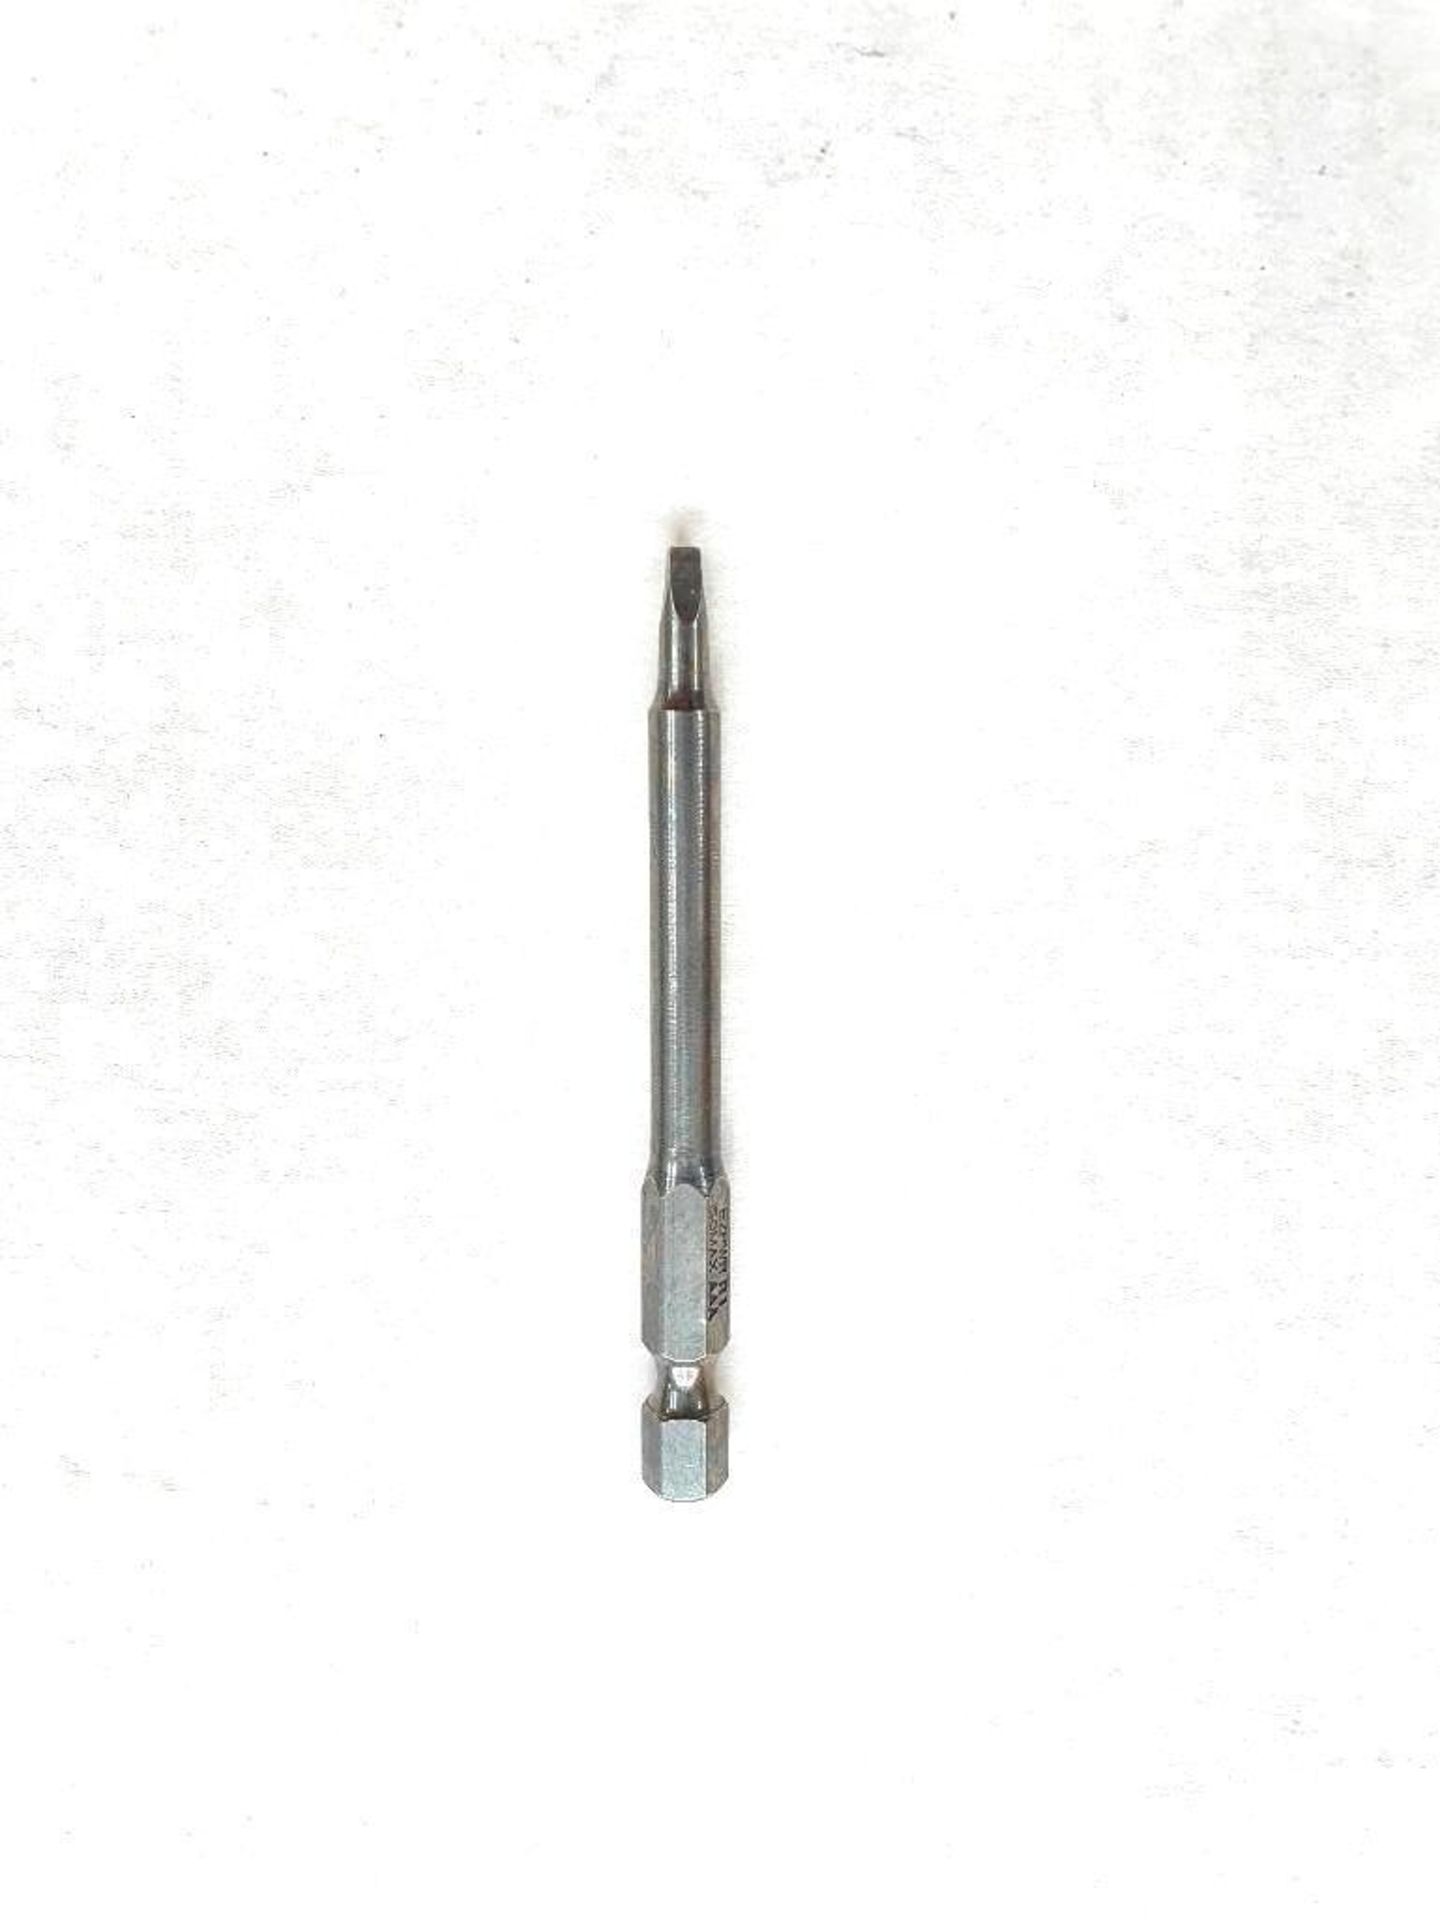 (1800) SQUARE RECESS BIT, SIZE R1, 3" BRAND/MODEL EAZYPOWER 79382 RETAIL PRICE (TOTAL): $3,222.00 LO - Image 2 of 4